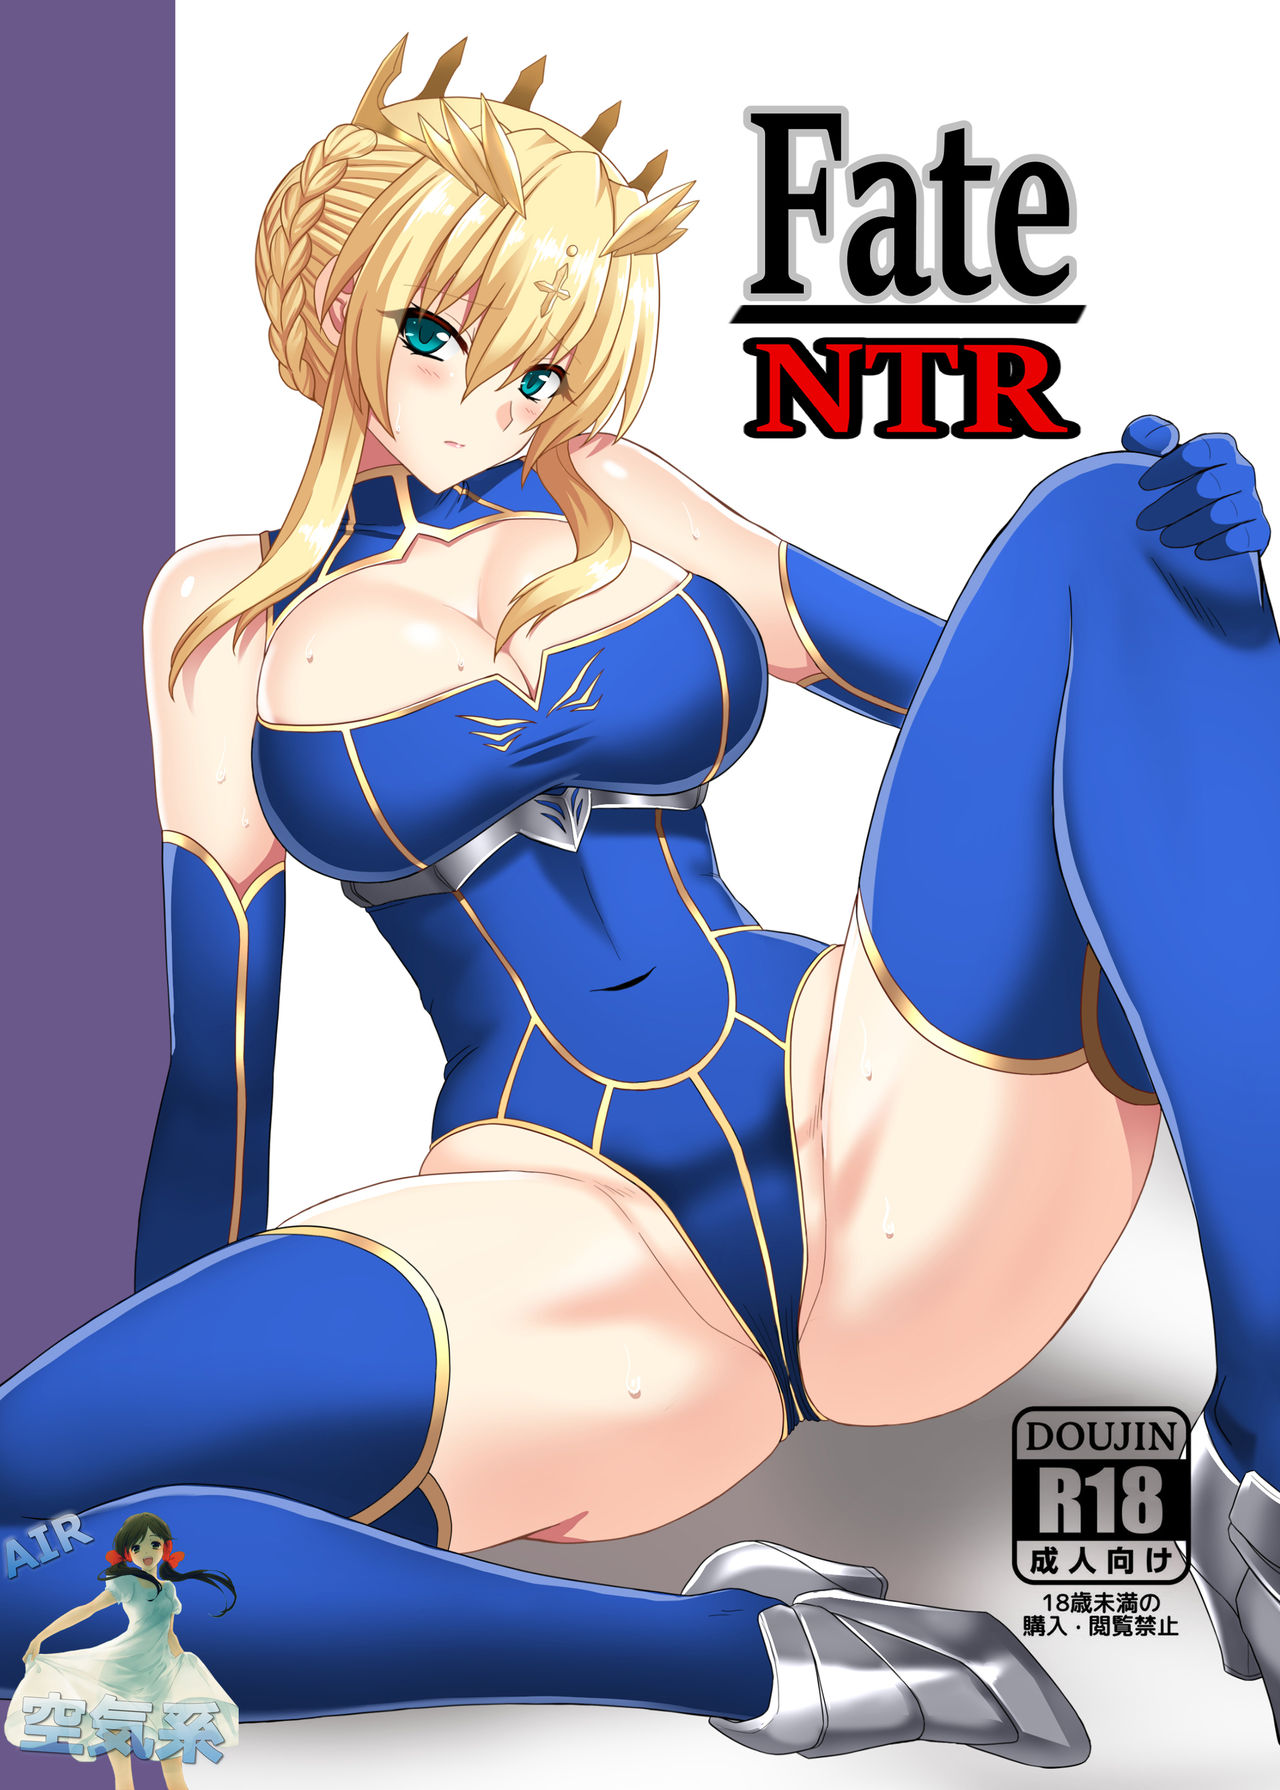 [Hell and Heaven] Fate/NTR (Fate/Grand Order) [Chinese] [空気系☆漢化] [Digital] [ヘルアンドヘブン] Fate/NTR (Fate/Grand Order) [中国翻訳] [DL版]